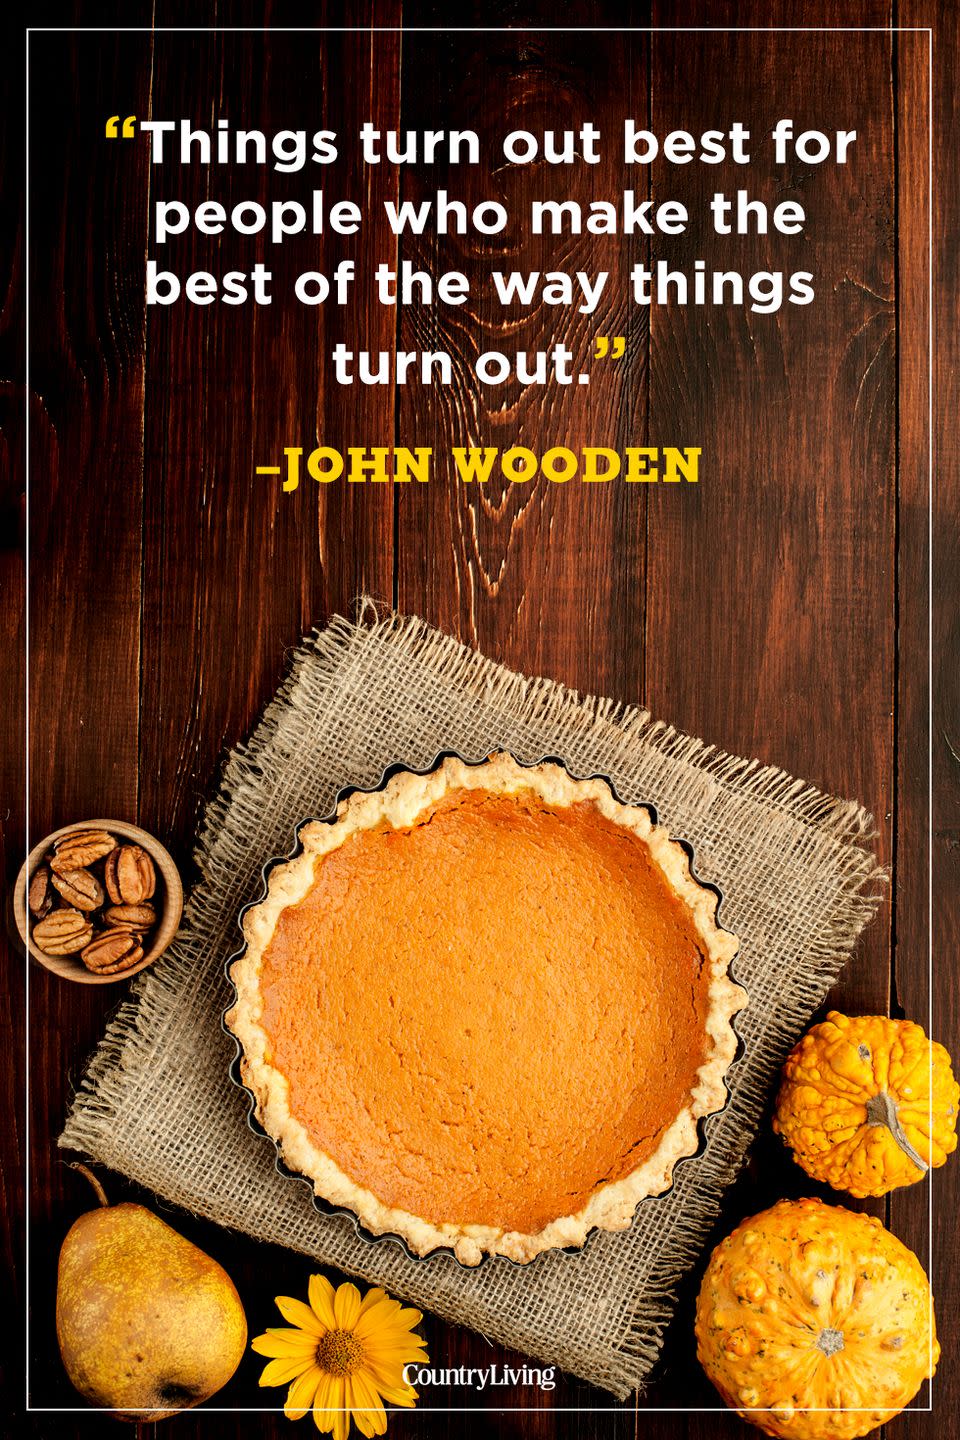 <p>"Things turn out best for people who make the best of the way things turn out."</p>